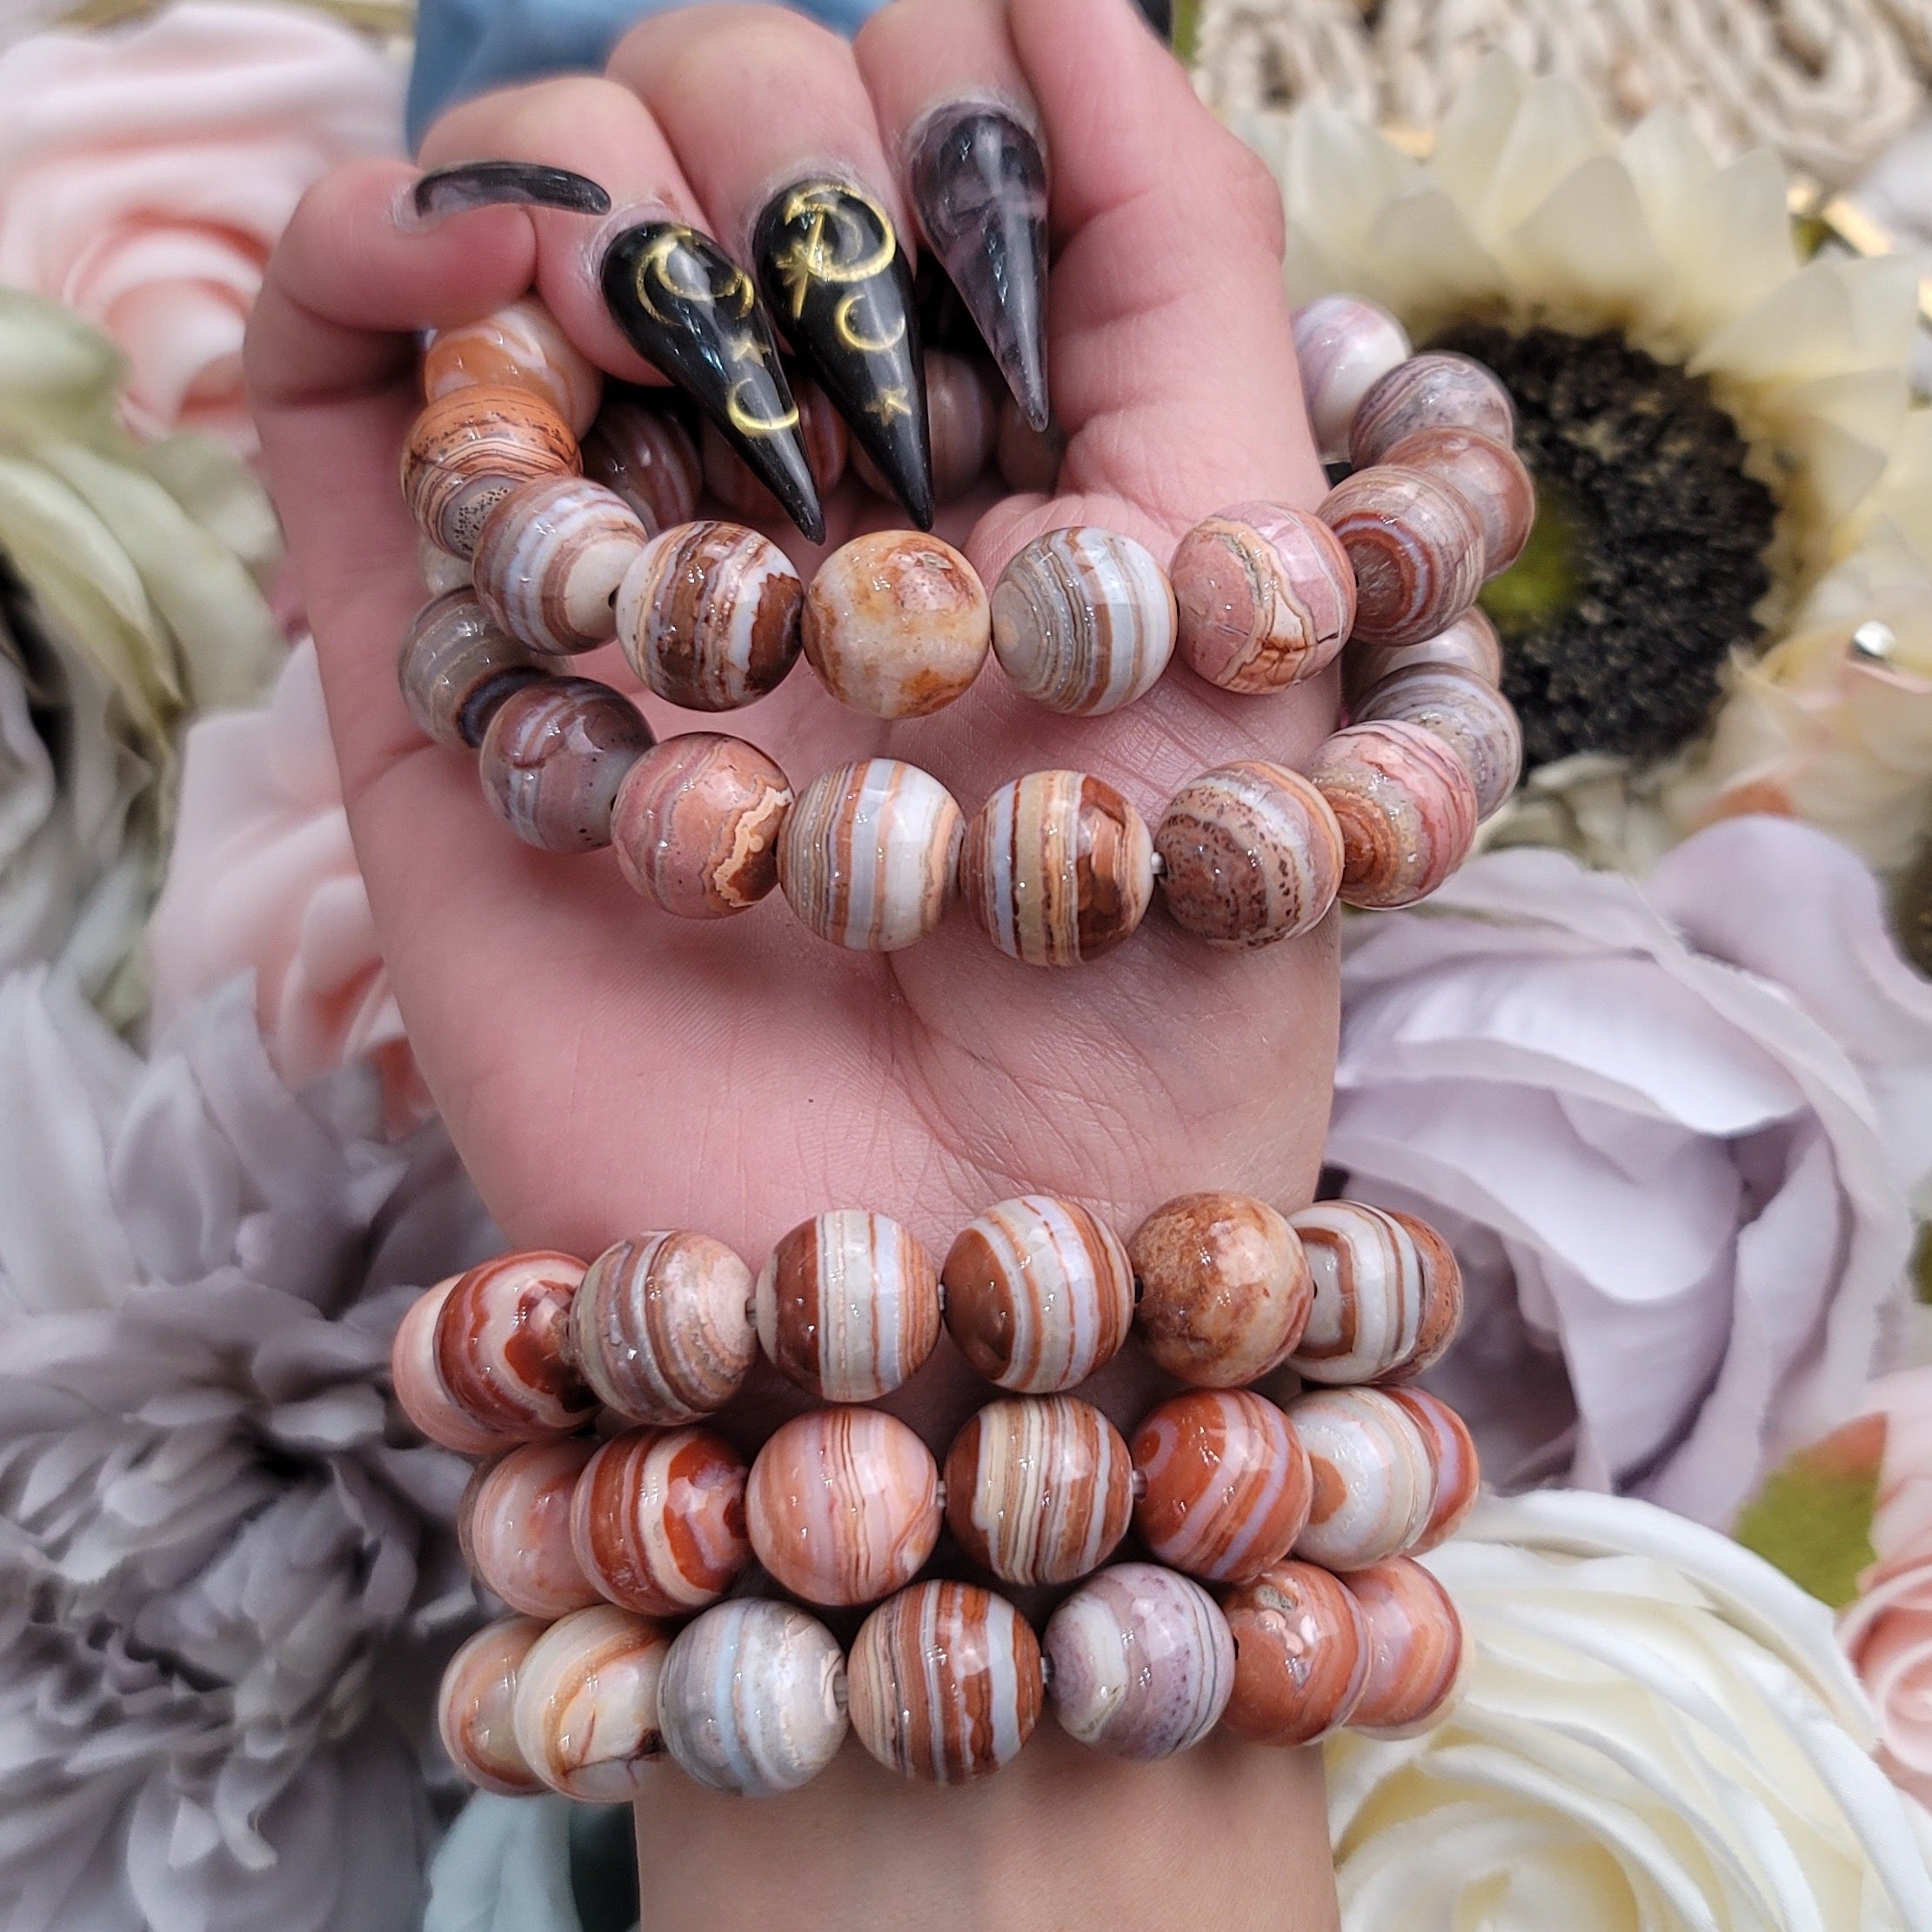 Red Lace Agate Bracelet for Enhancing Thought Patterns to Create a Positive Reality